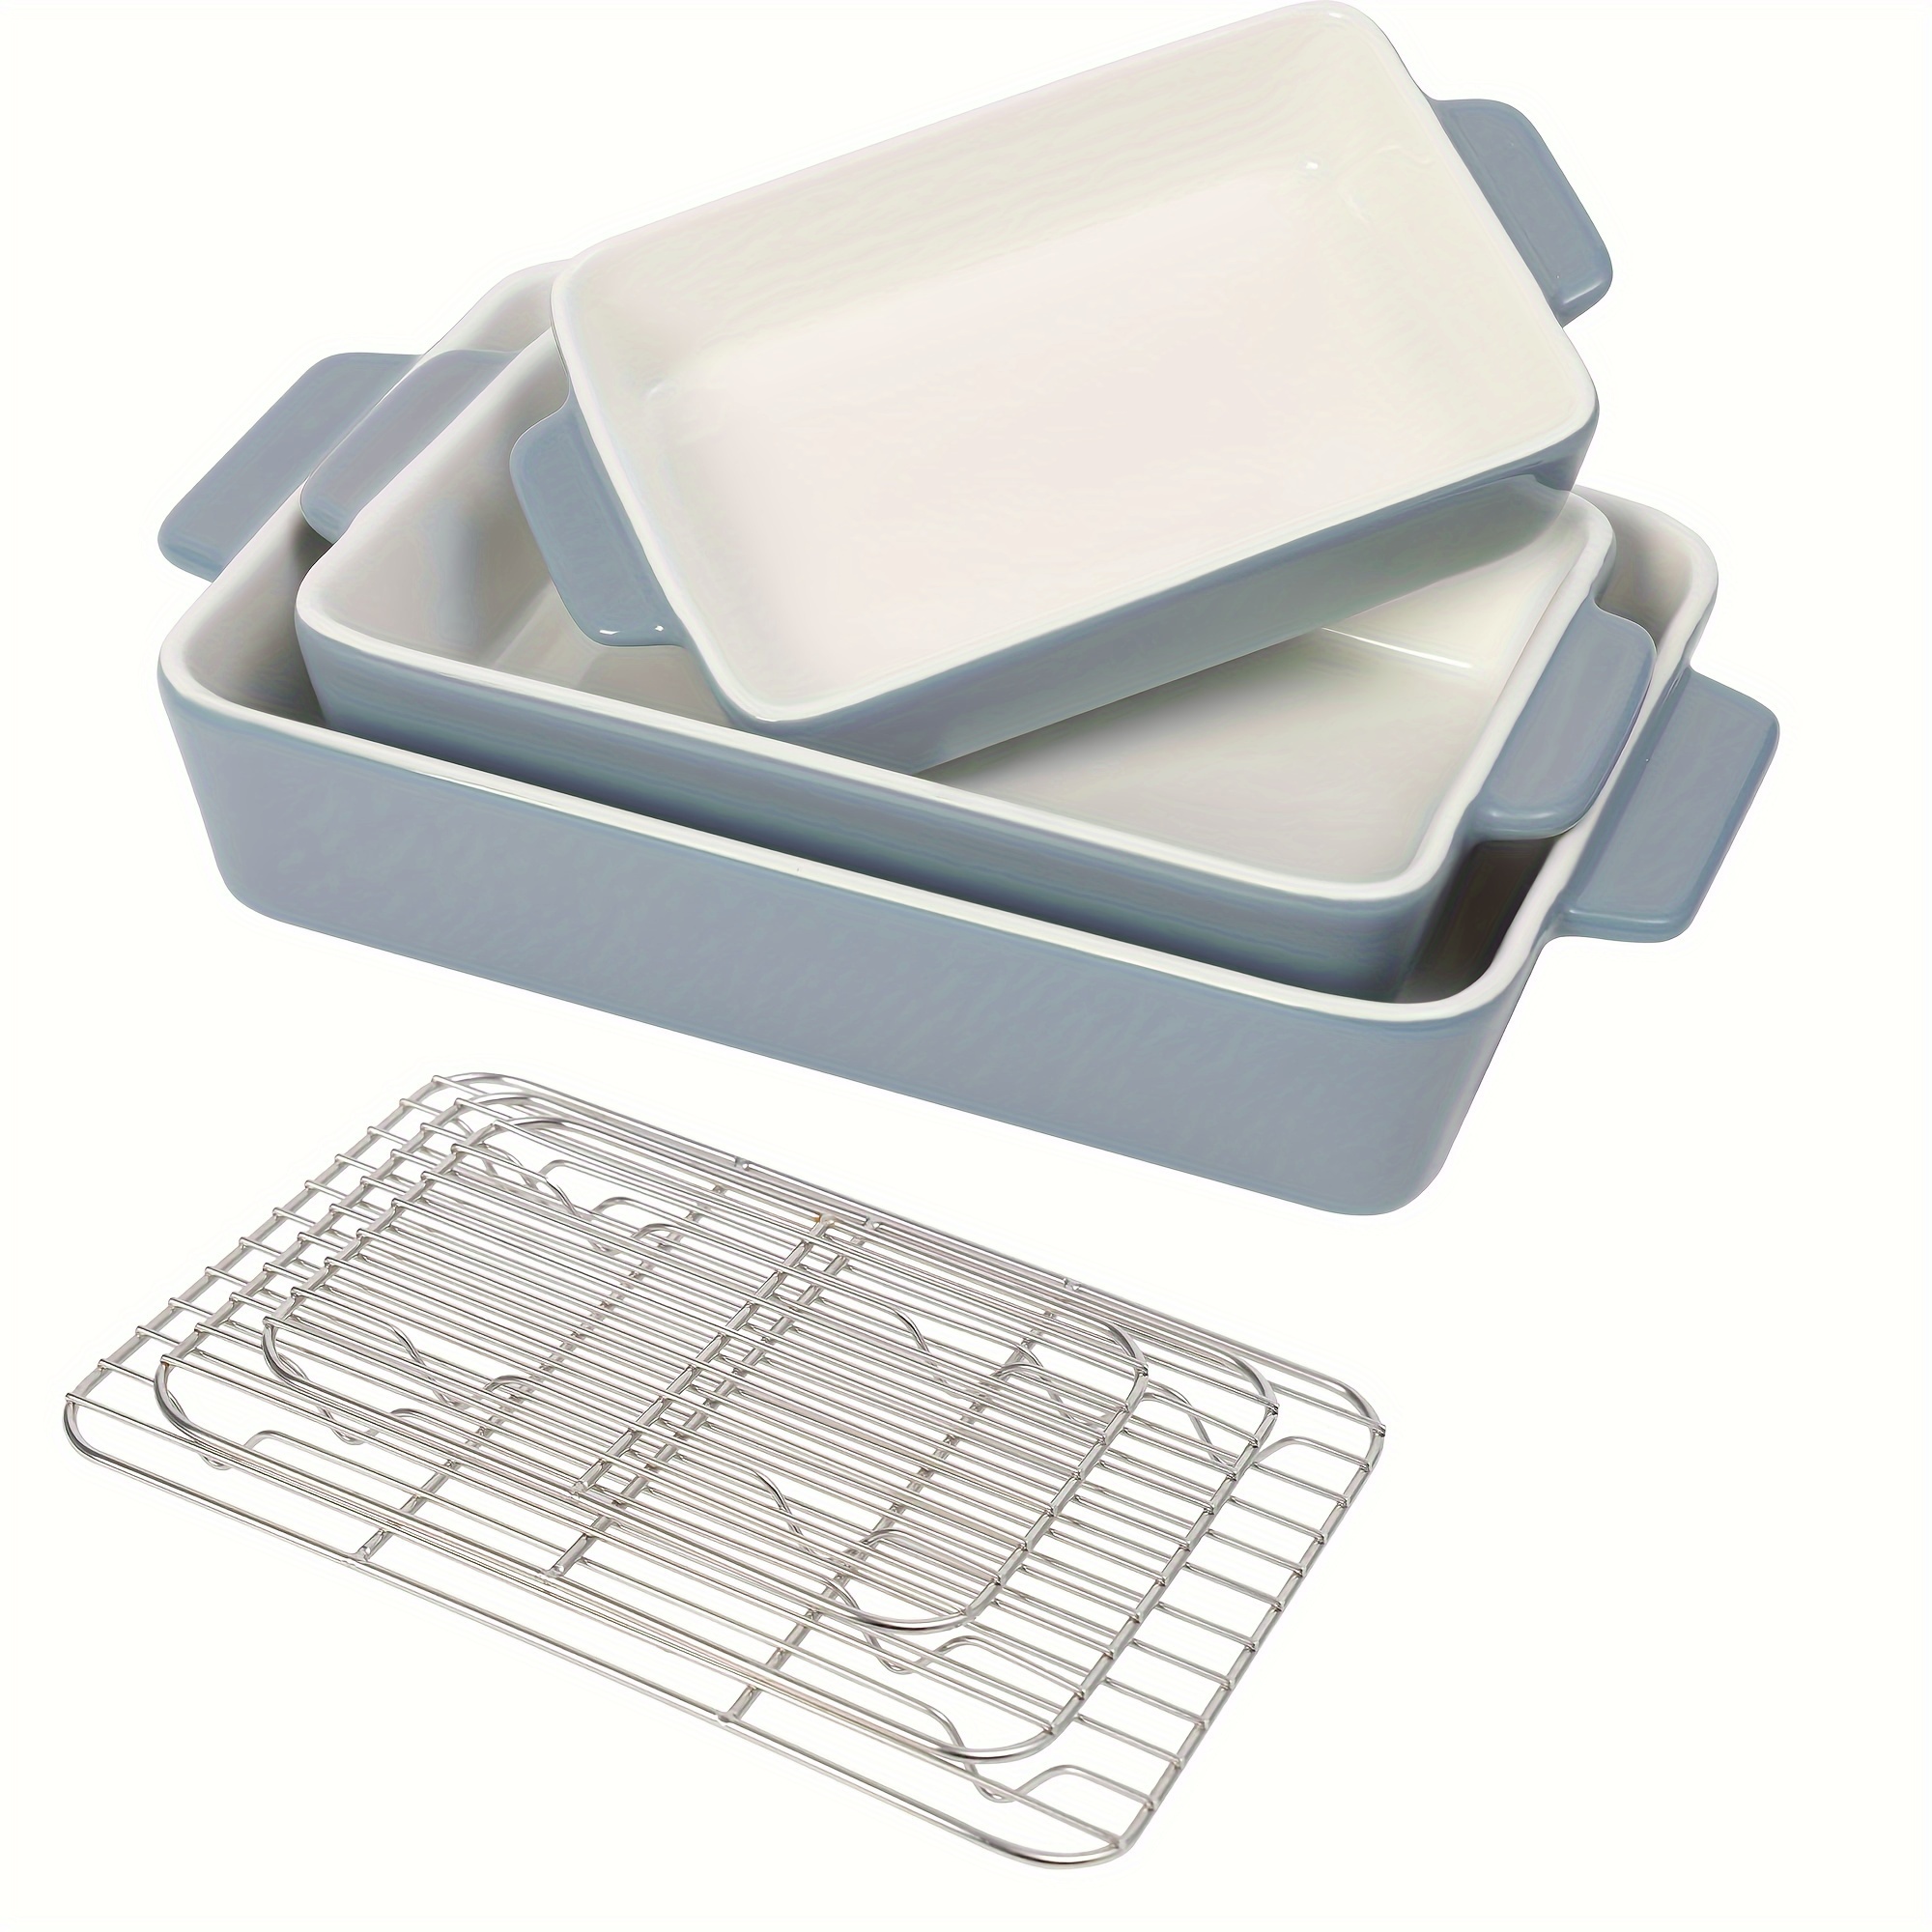 

Casserole Dishes For Oven With Iron Shelf, Ceramic Baking Dishes For Oven Set Of 3, Large Bakeware Pans For Lasagna, Rectangular Casserole Dish Set With Handles For Baking